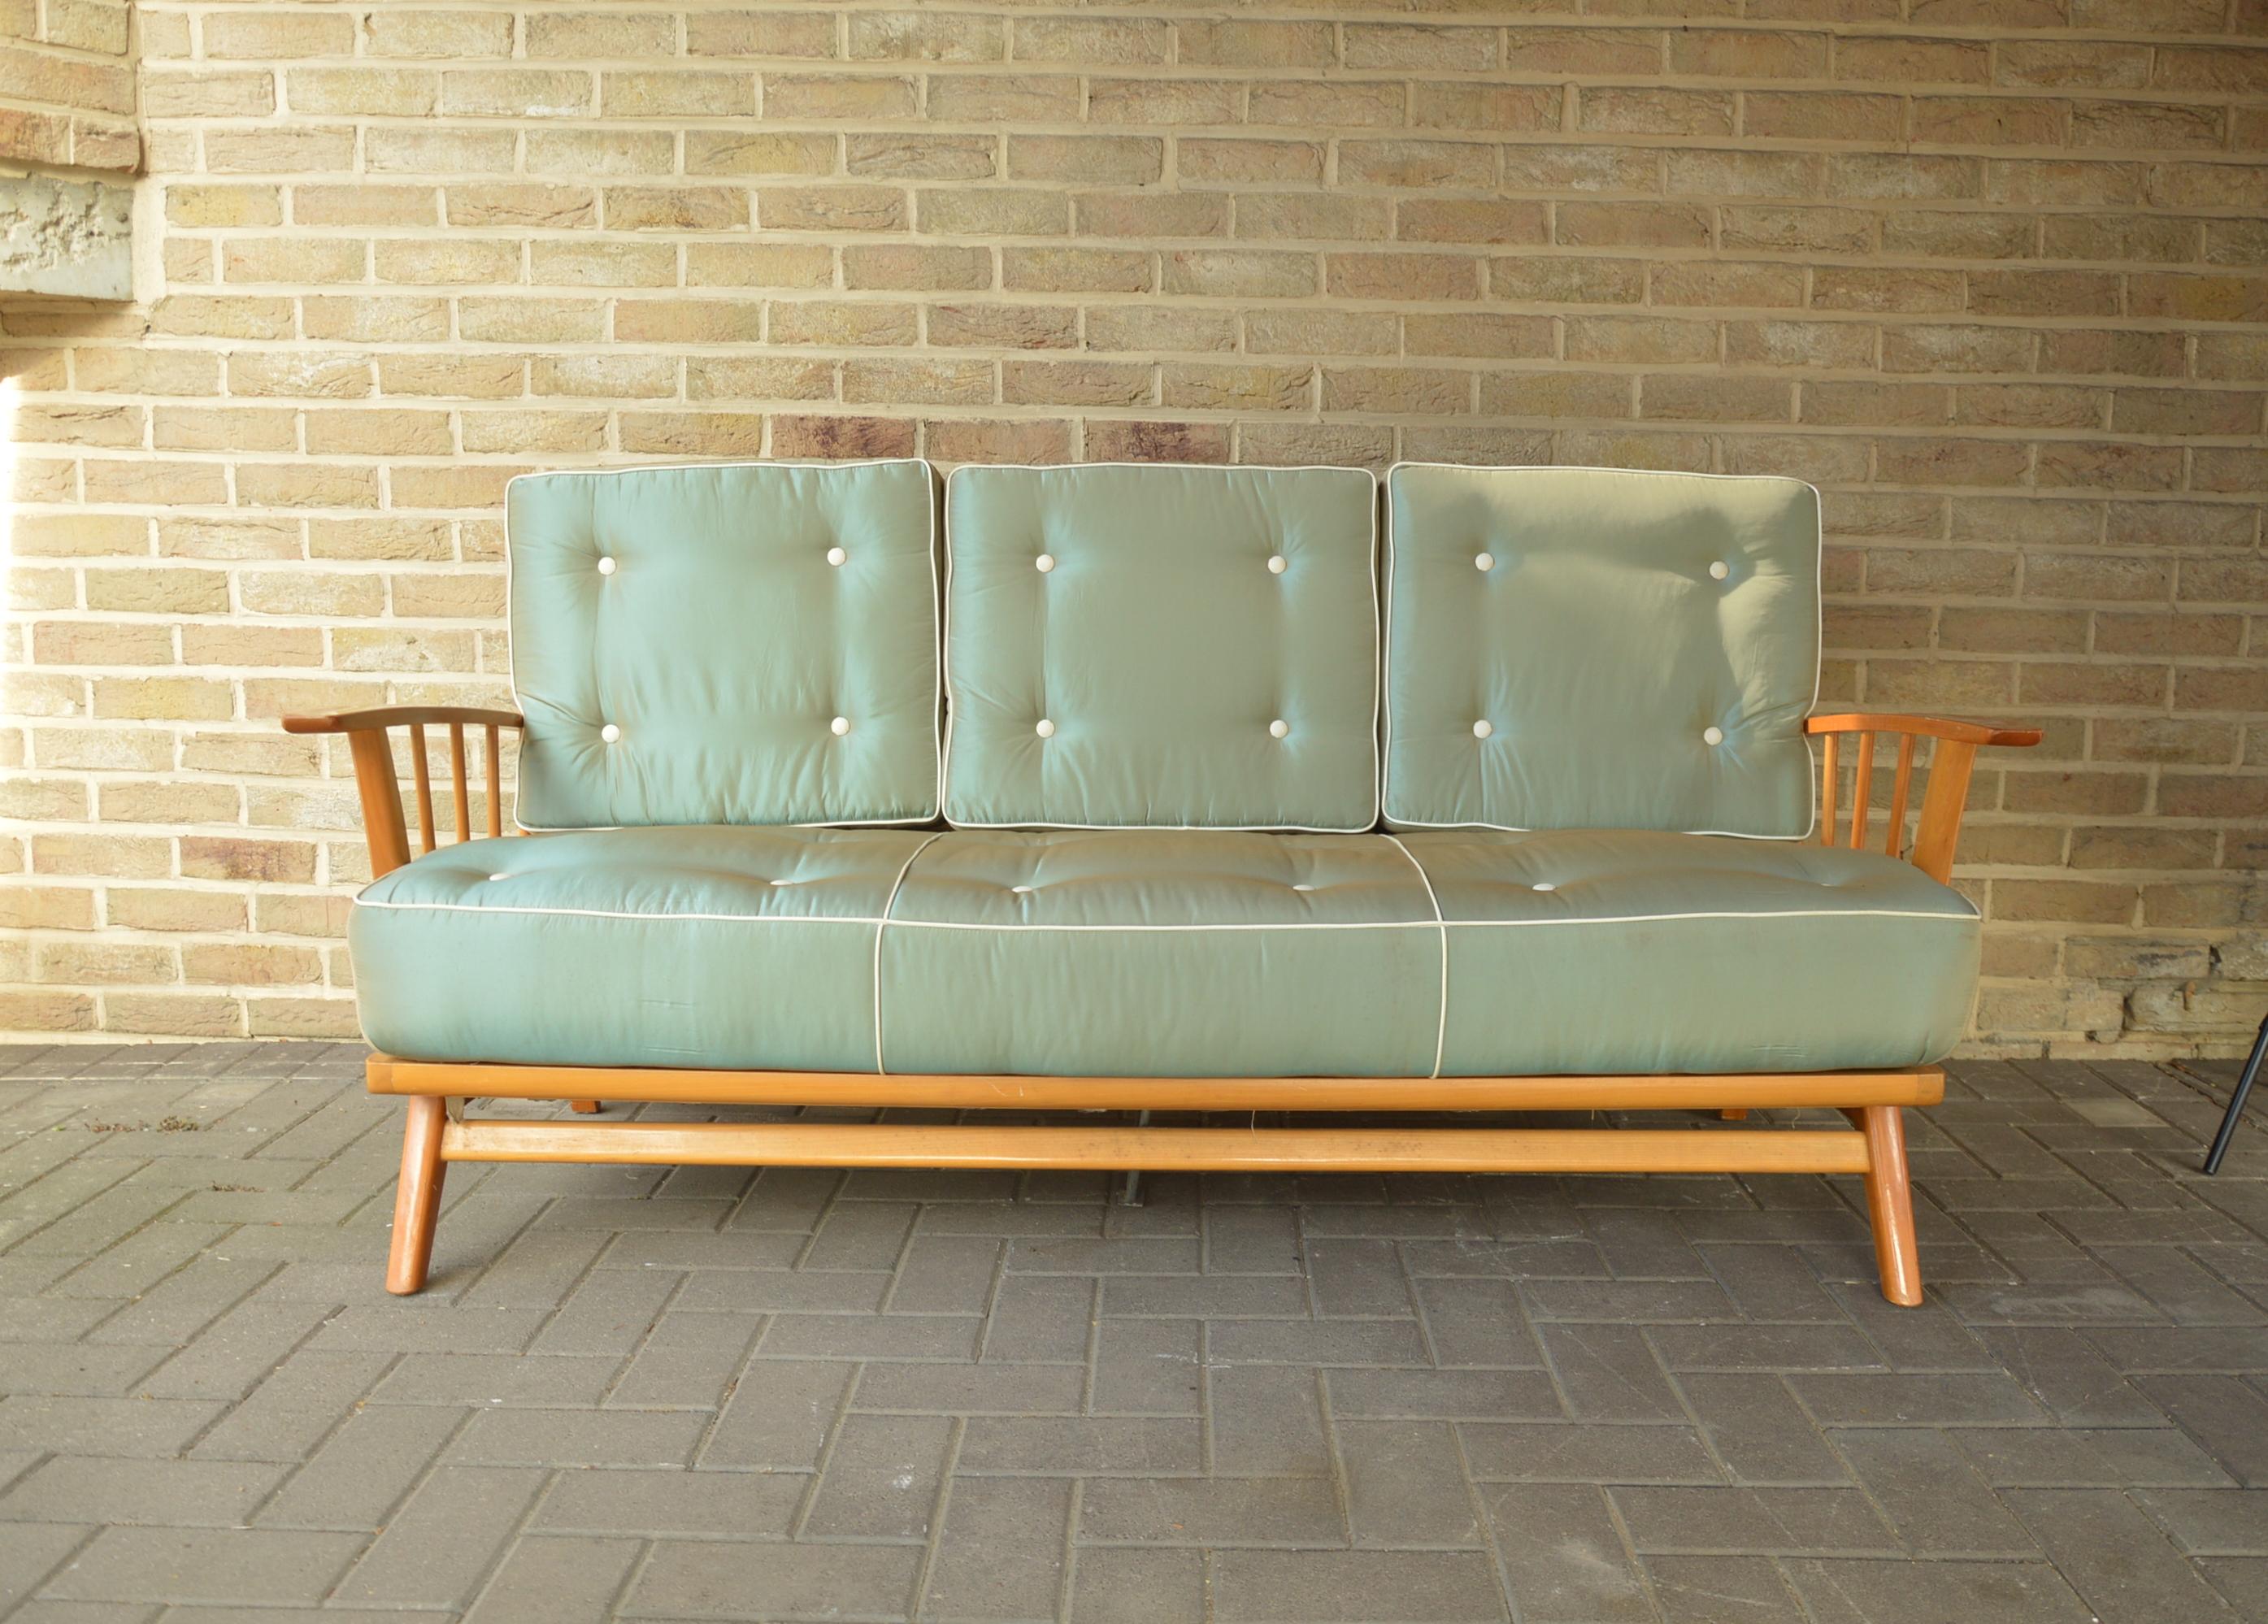 Modernist Designer Vintage Sofa with Foldable Arms, 1960s im Zustand „Gut“ im Angebot in Brussels, BE